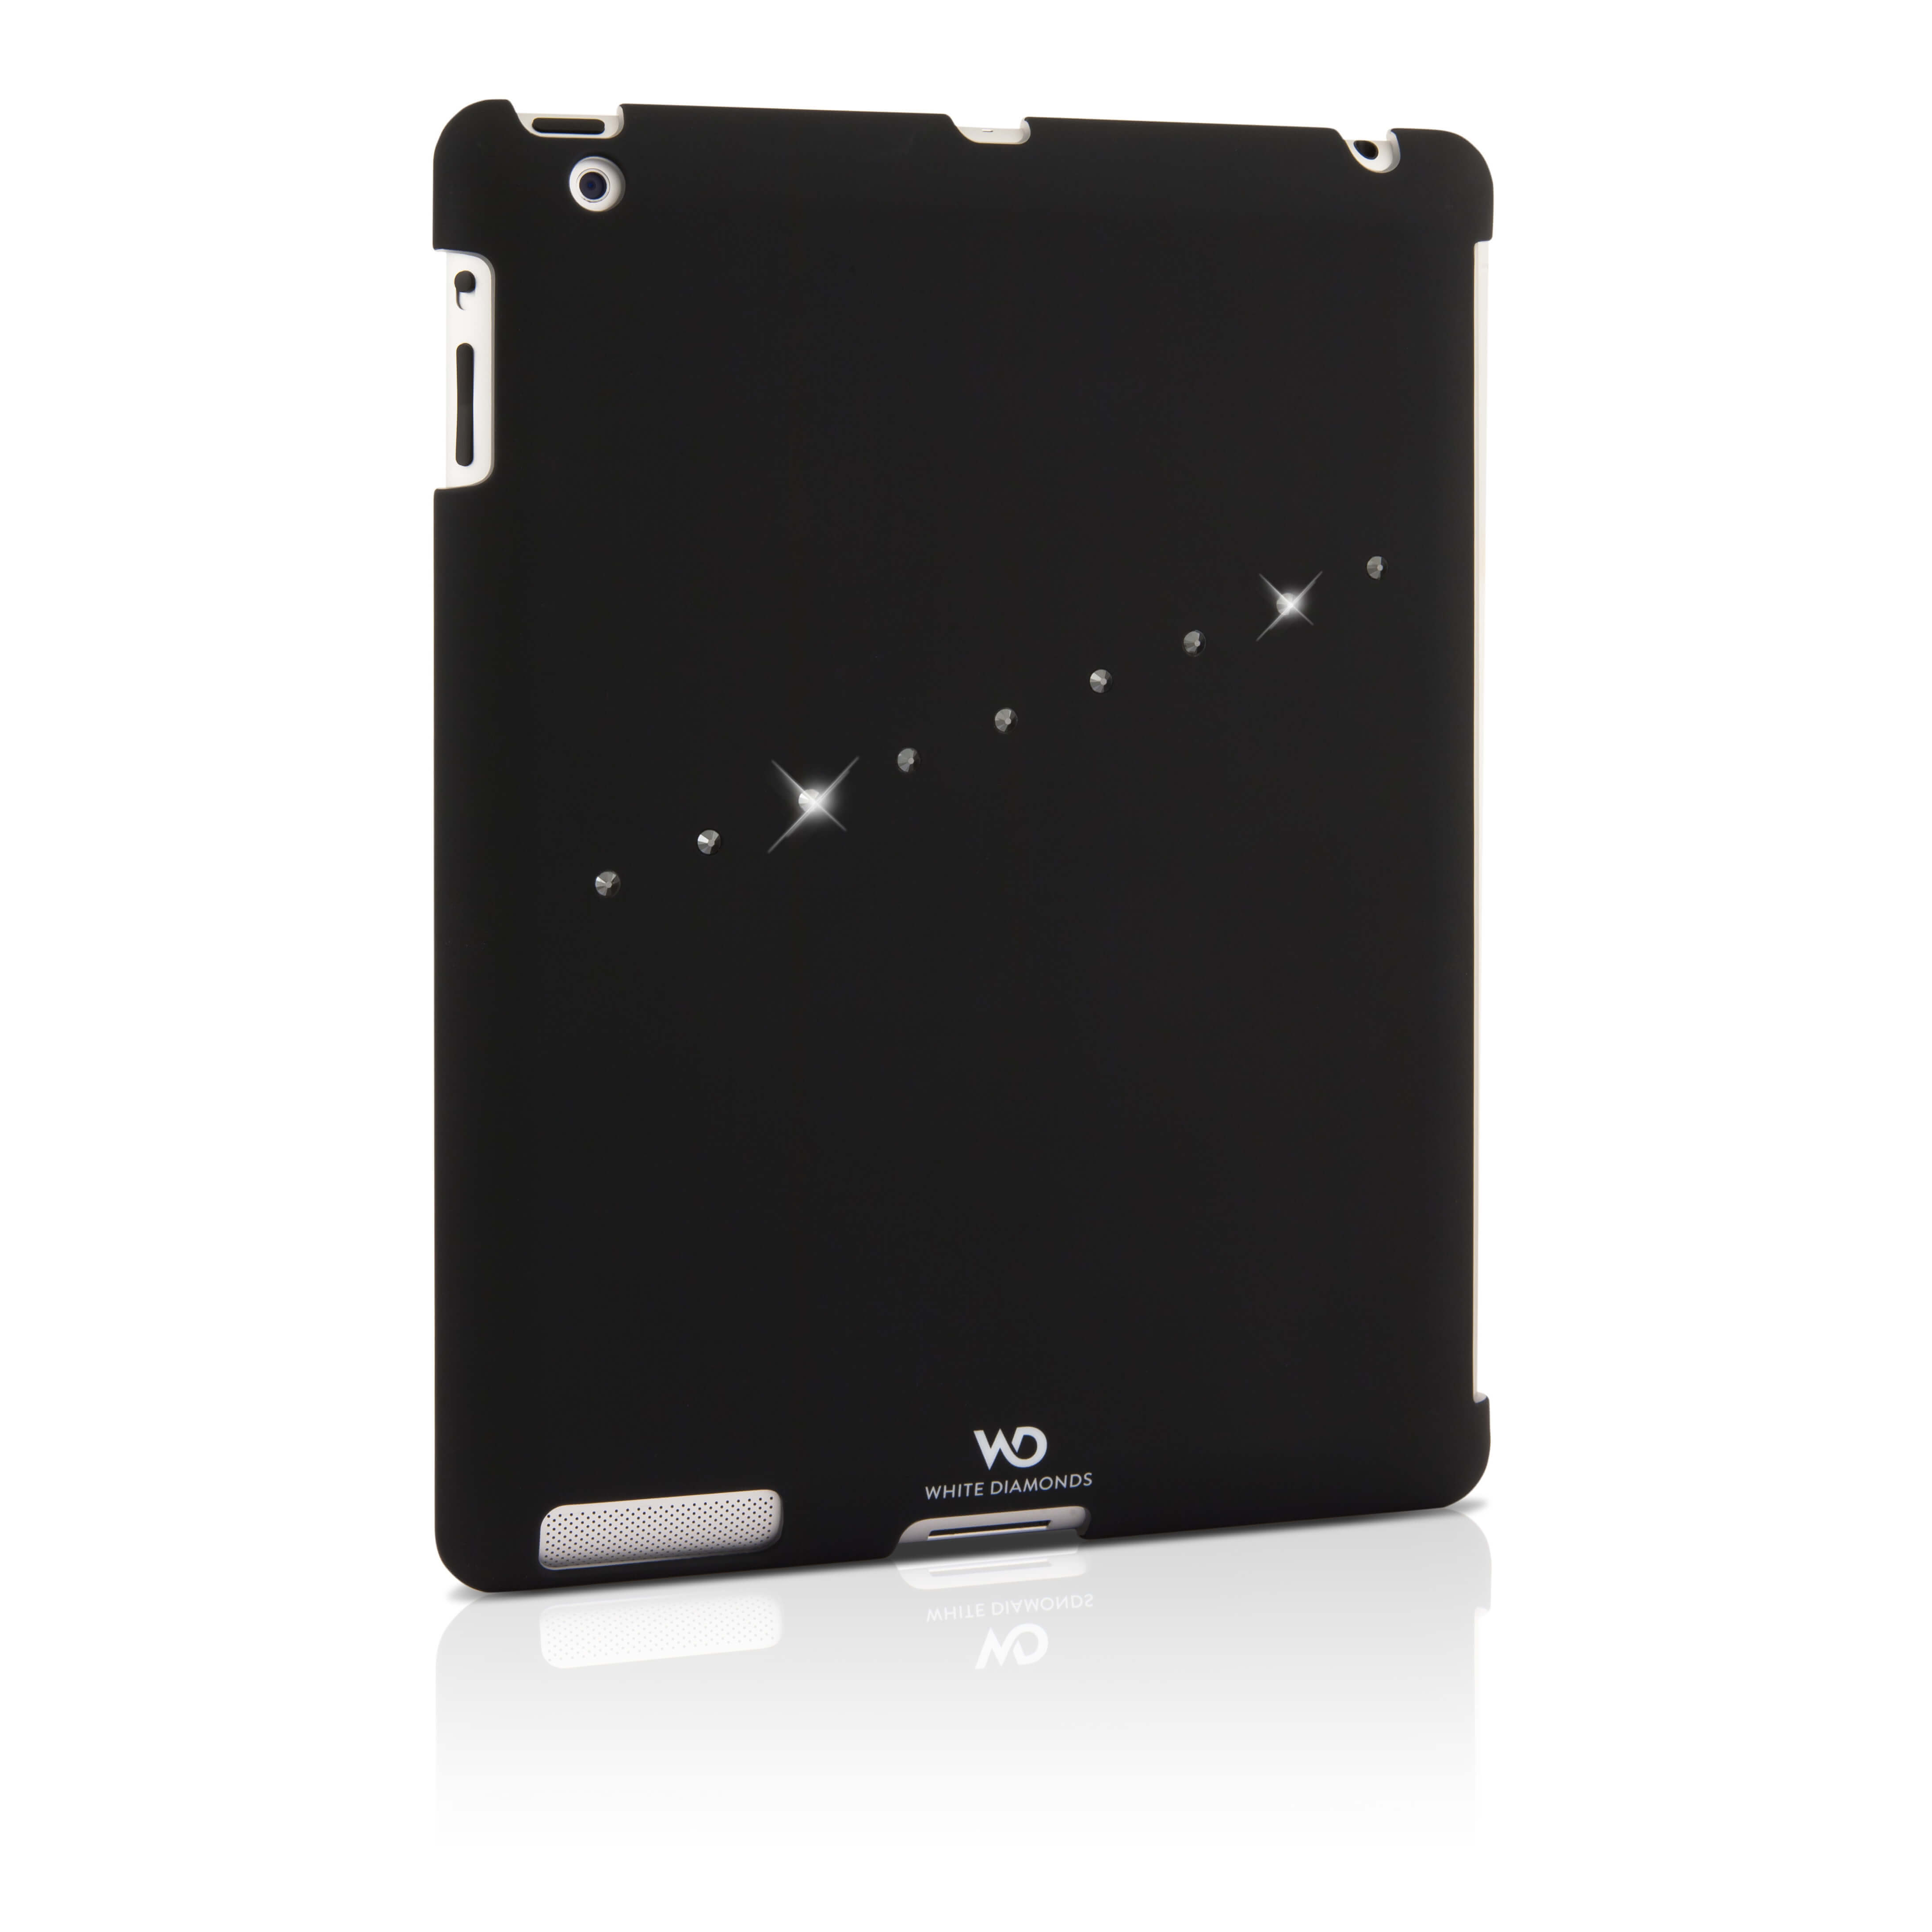 Sash Cover for iPad 3rd/4th G eneration, black